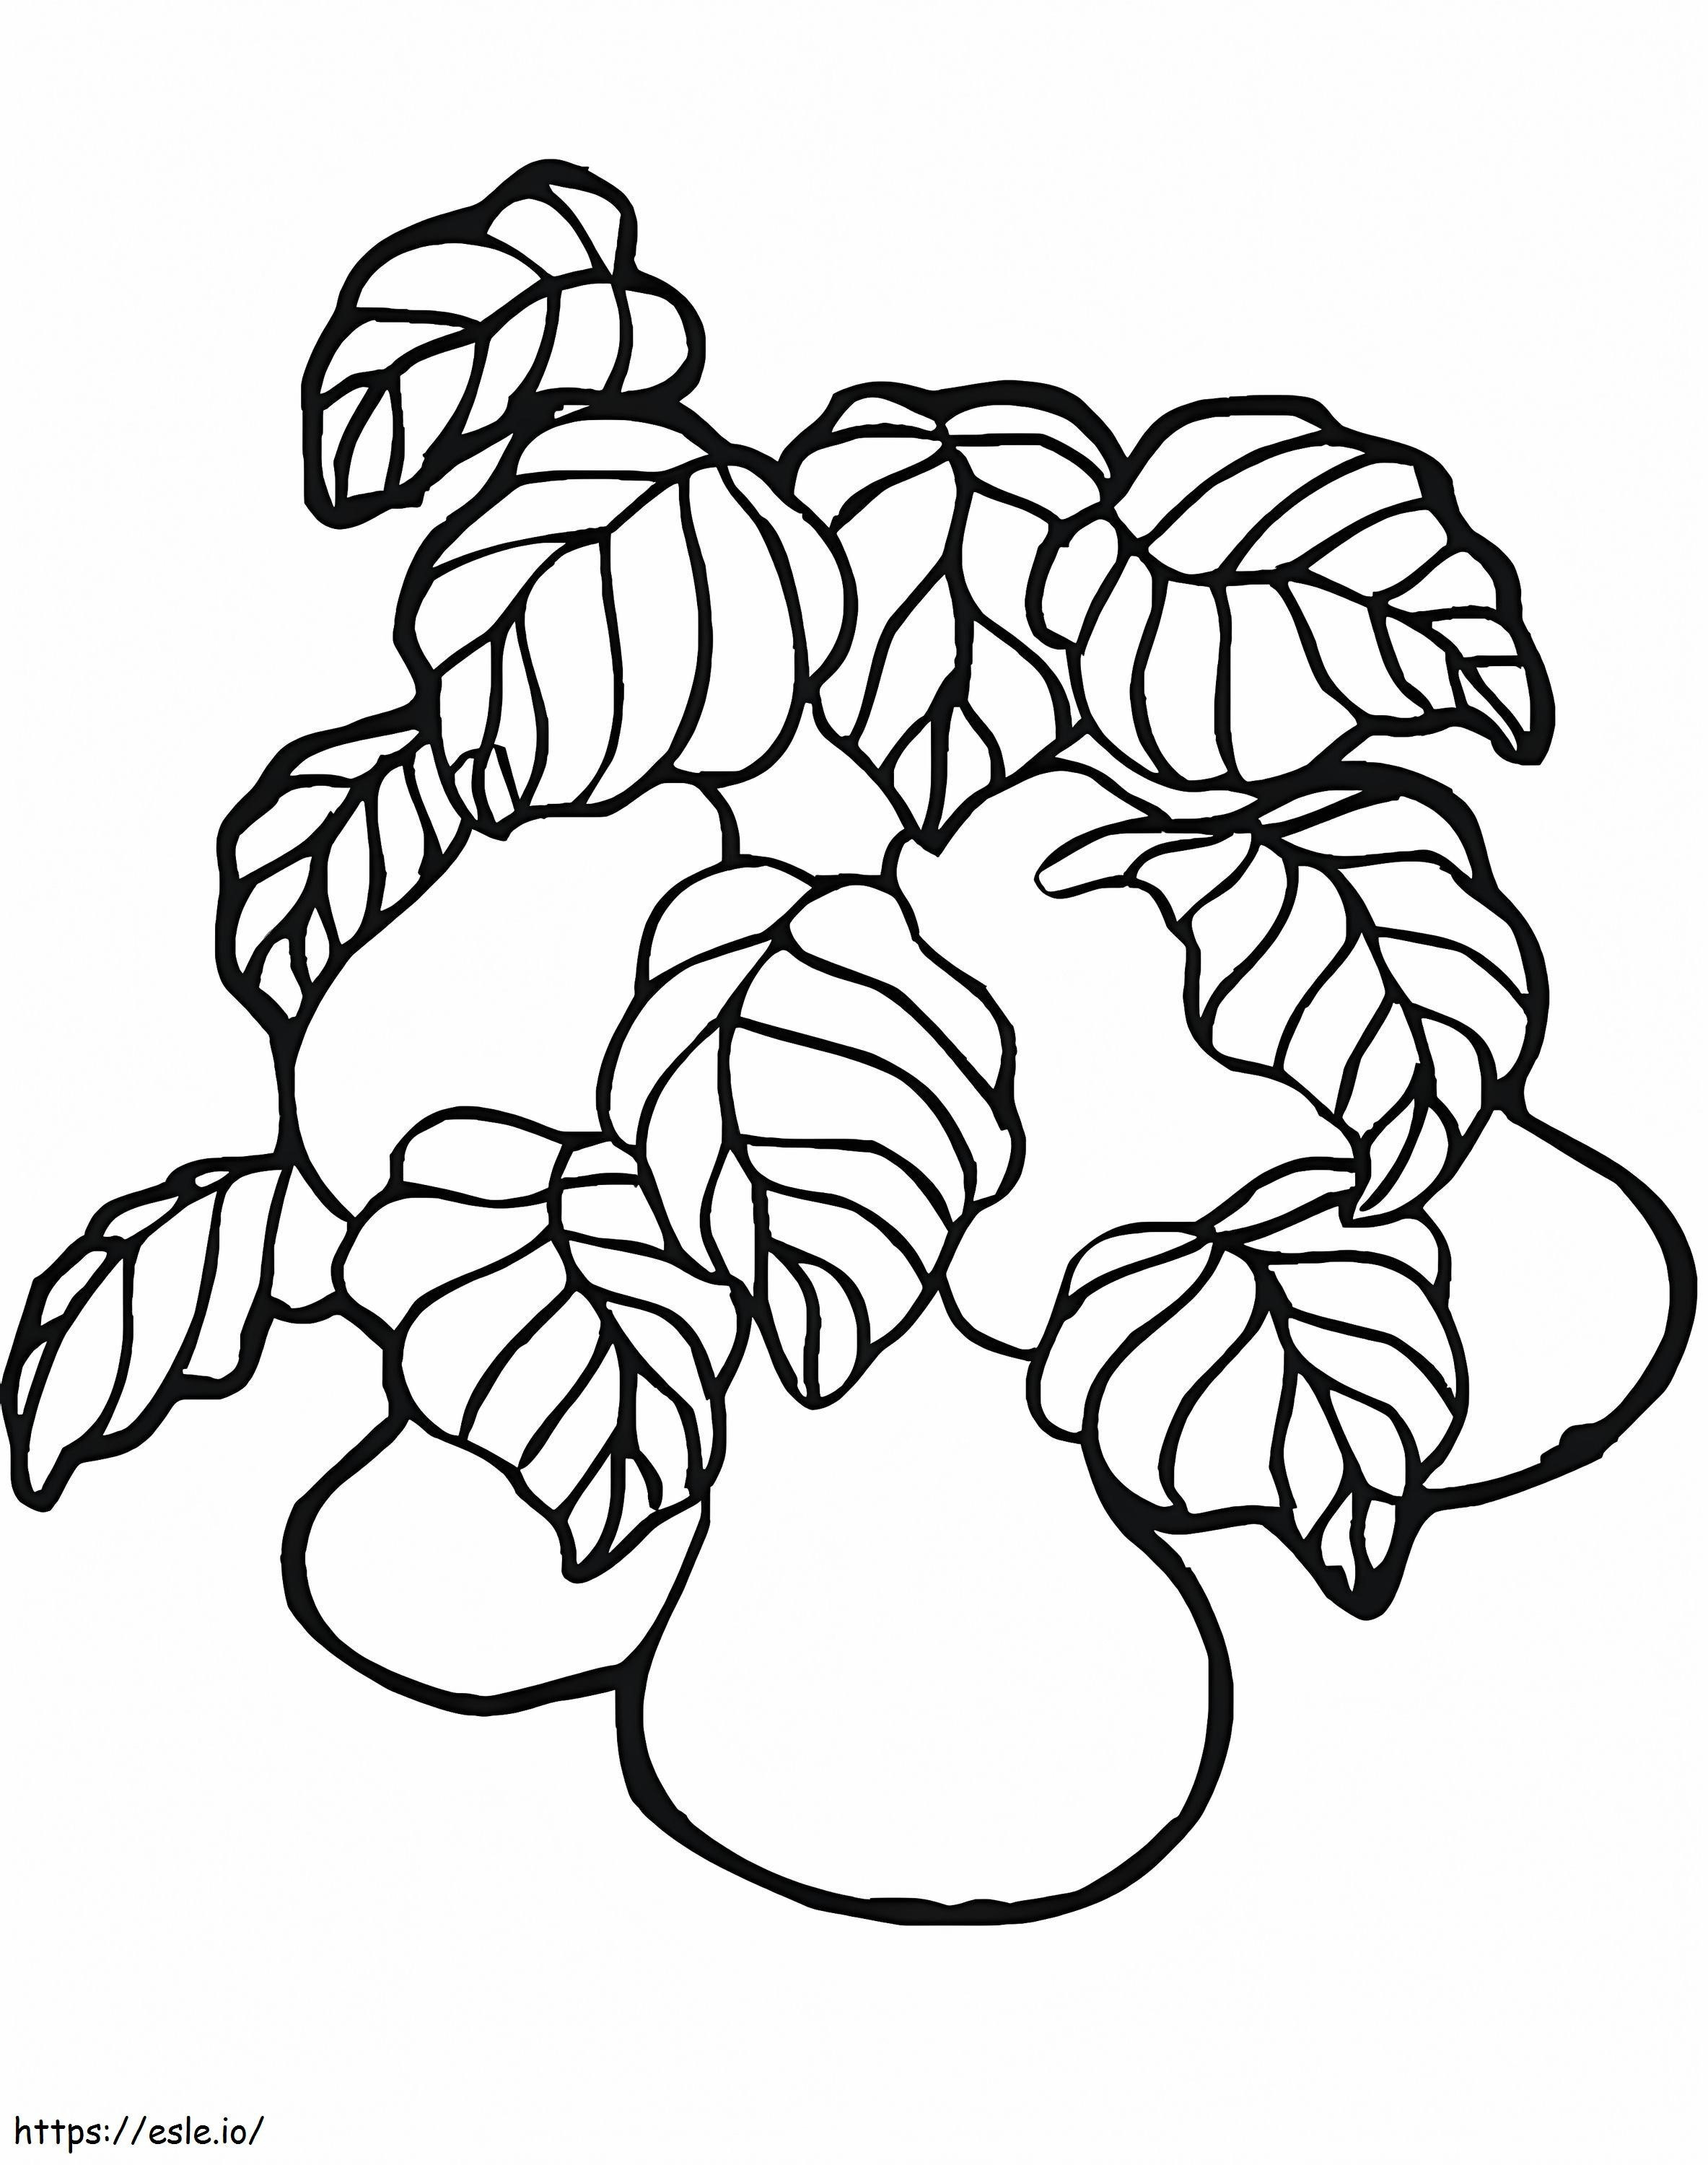 Pears Fruits coloring page